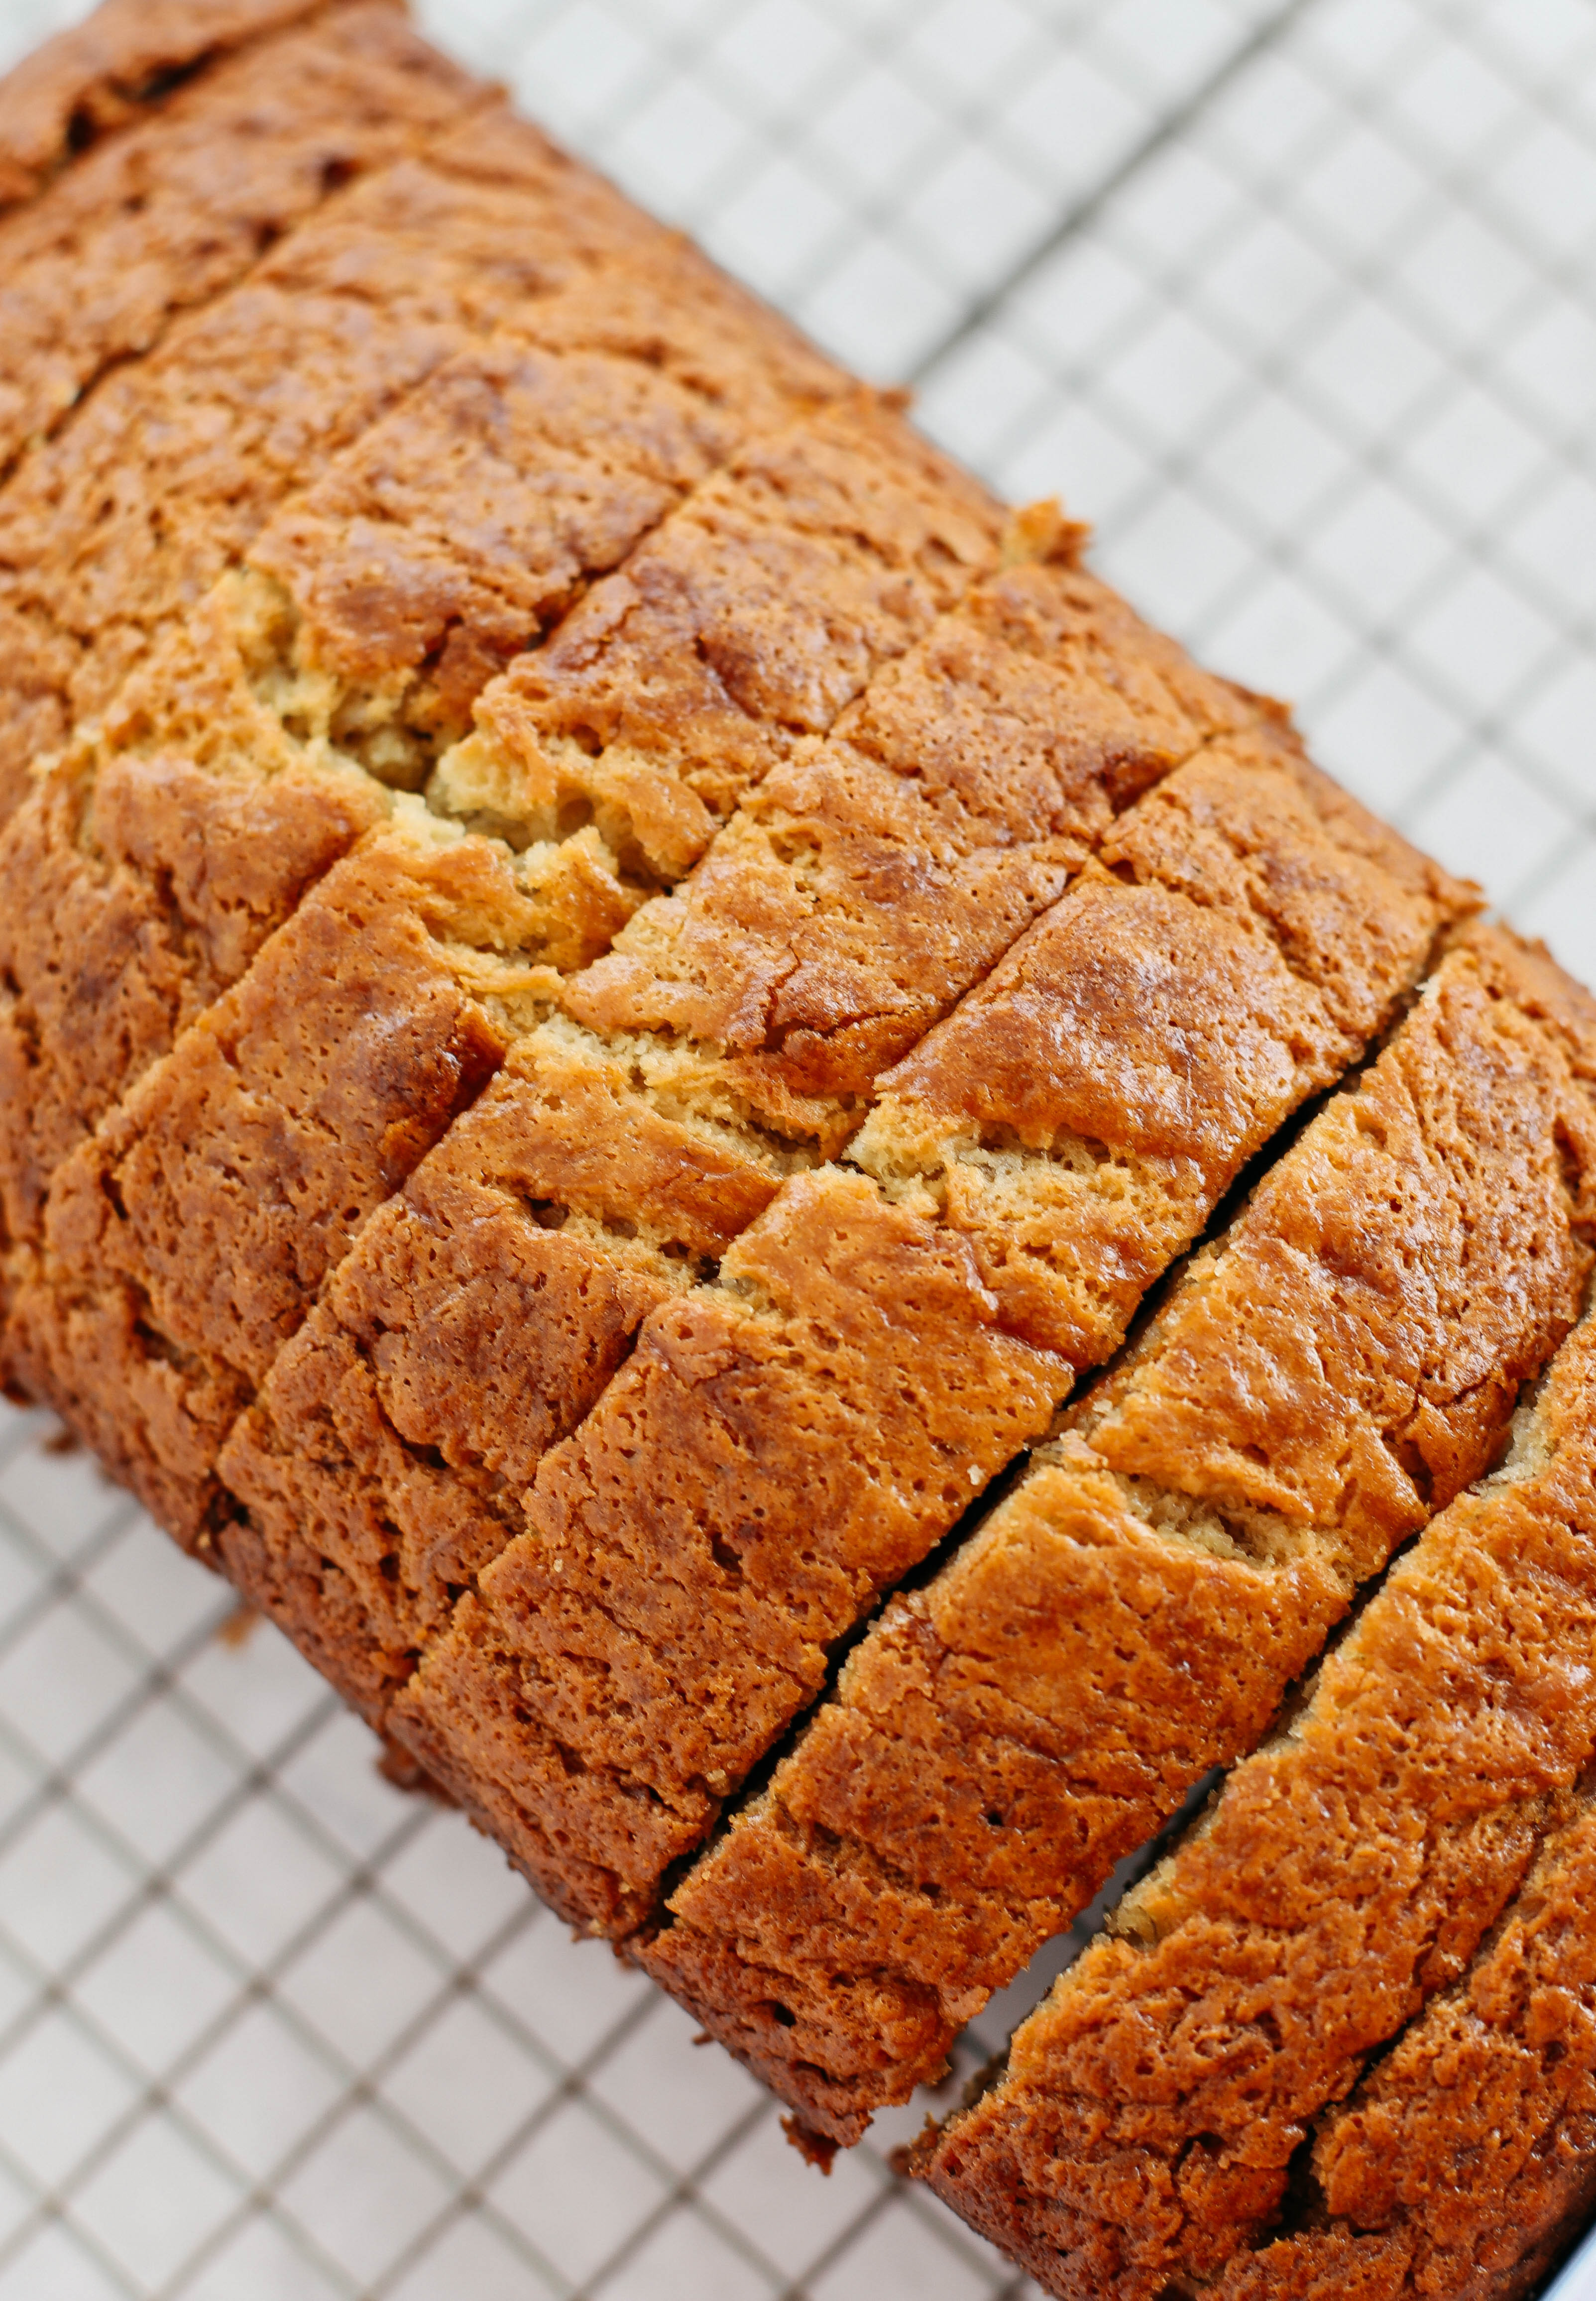 My Grandma's tried and true Easy Banana Bread recipe is a classic favorite and hands down the BEST!  Perfectly sweet, super moist and loaded with delicious banana flavor!